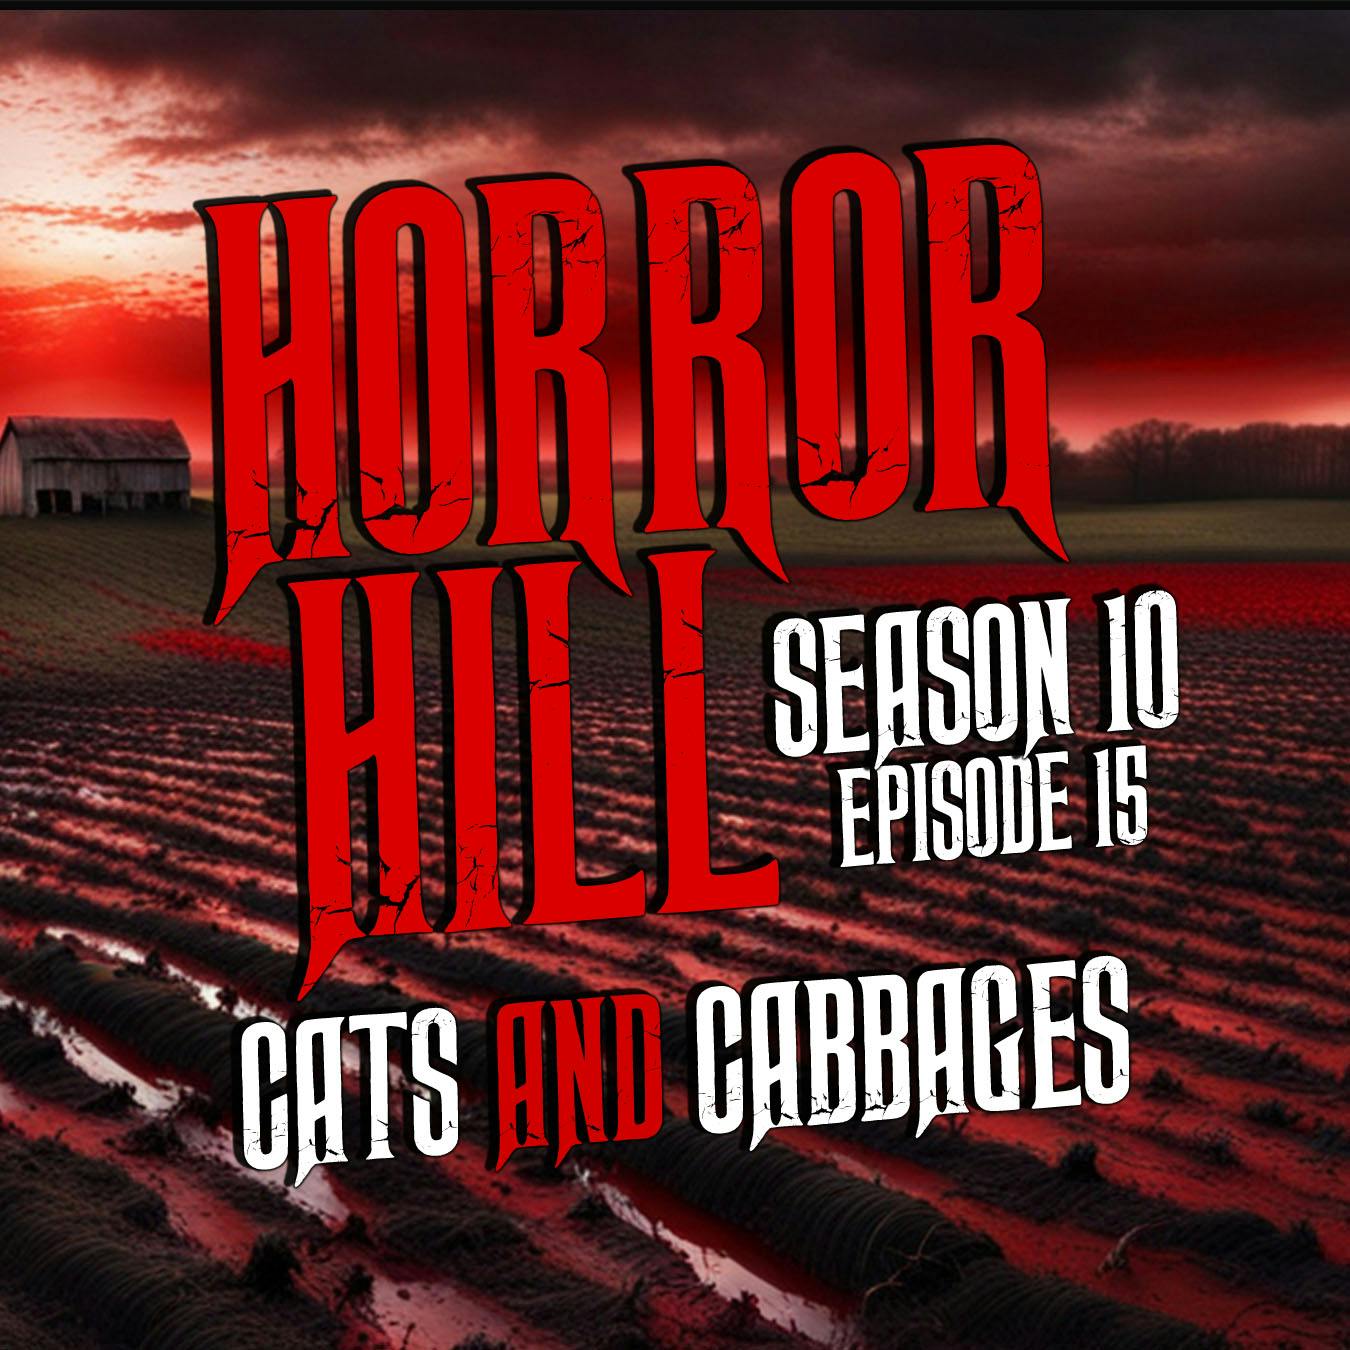 S10E15 - “Cats and Cabbages" - Horror Hill